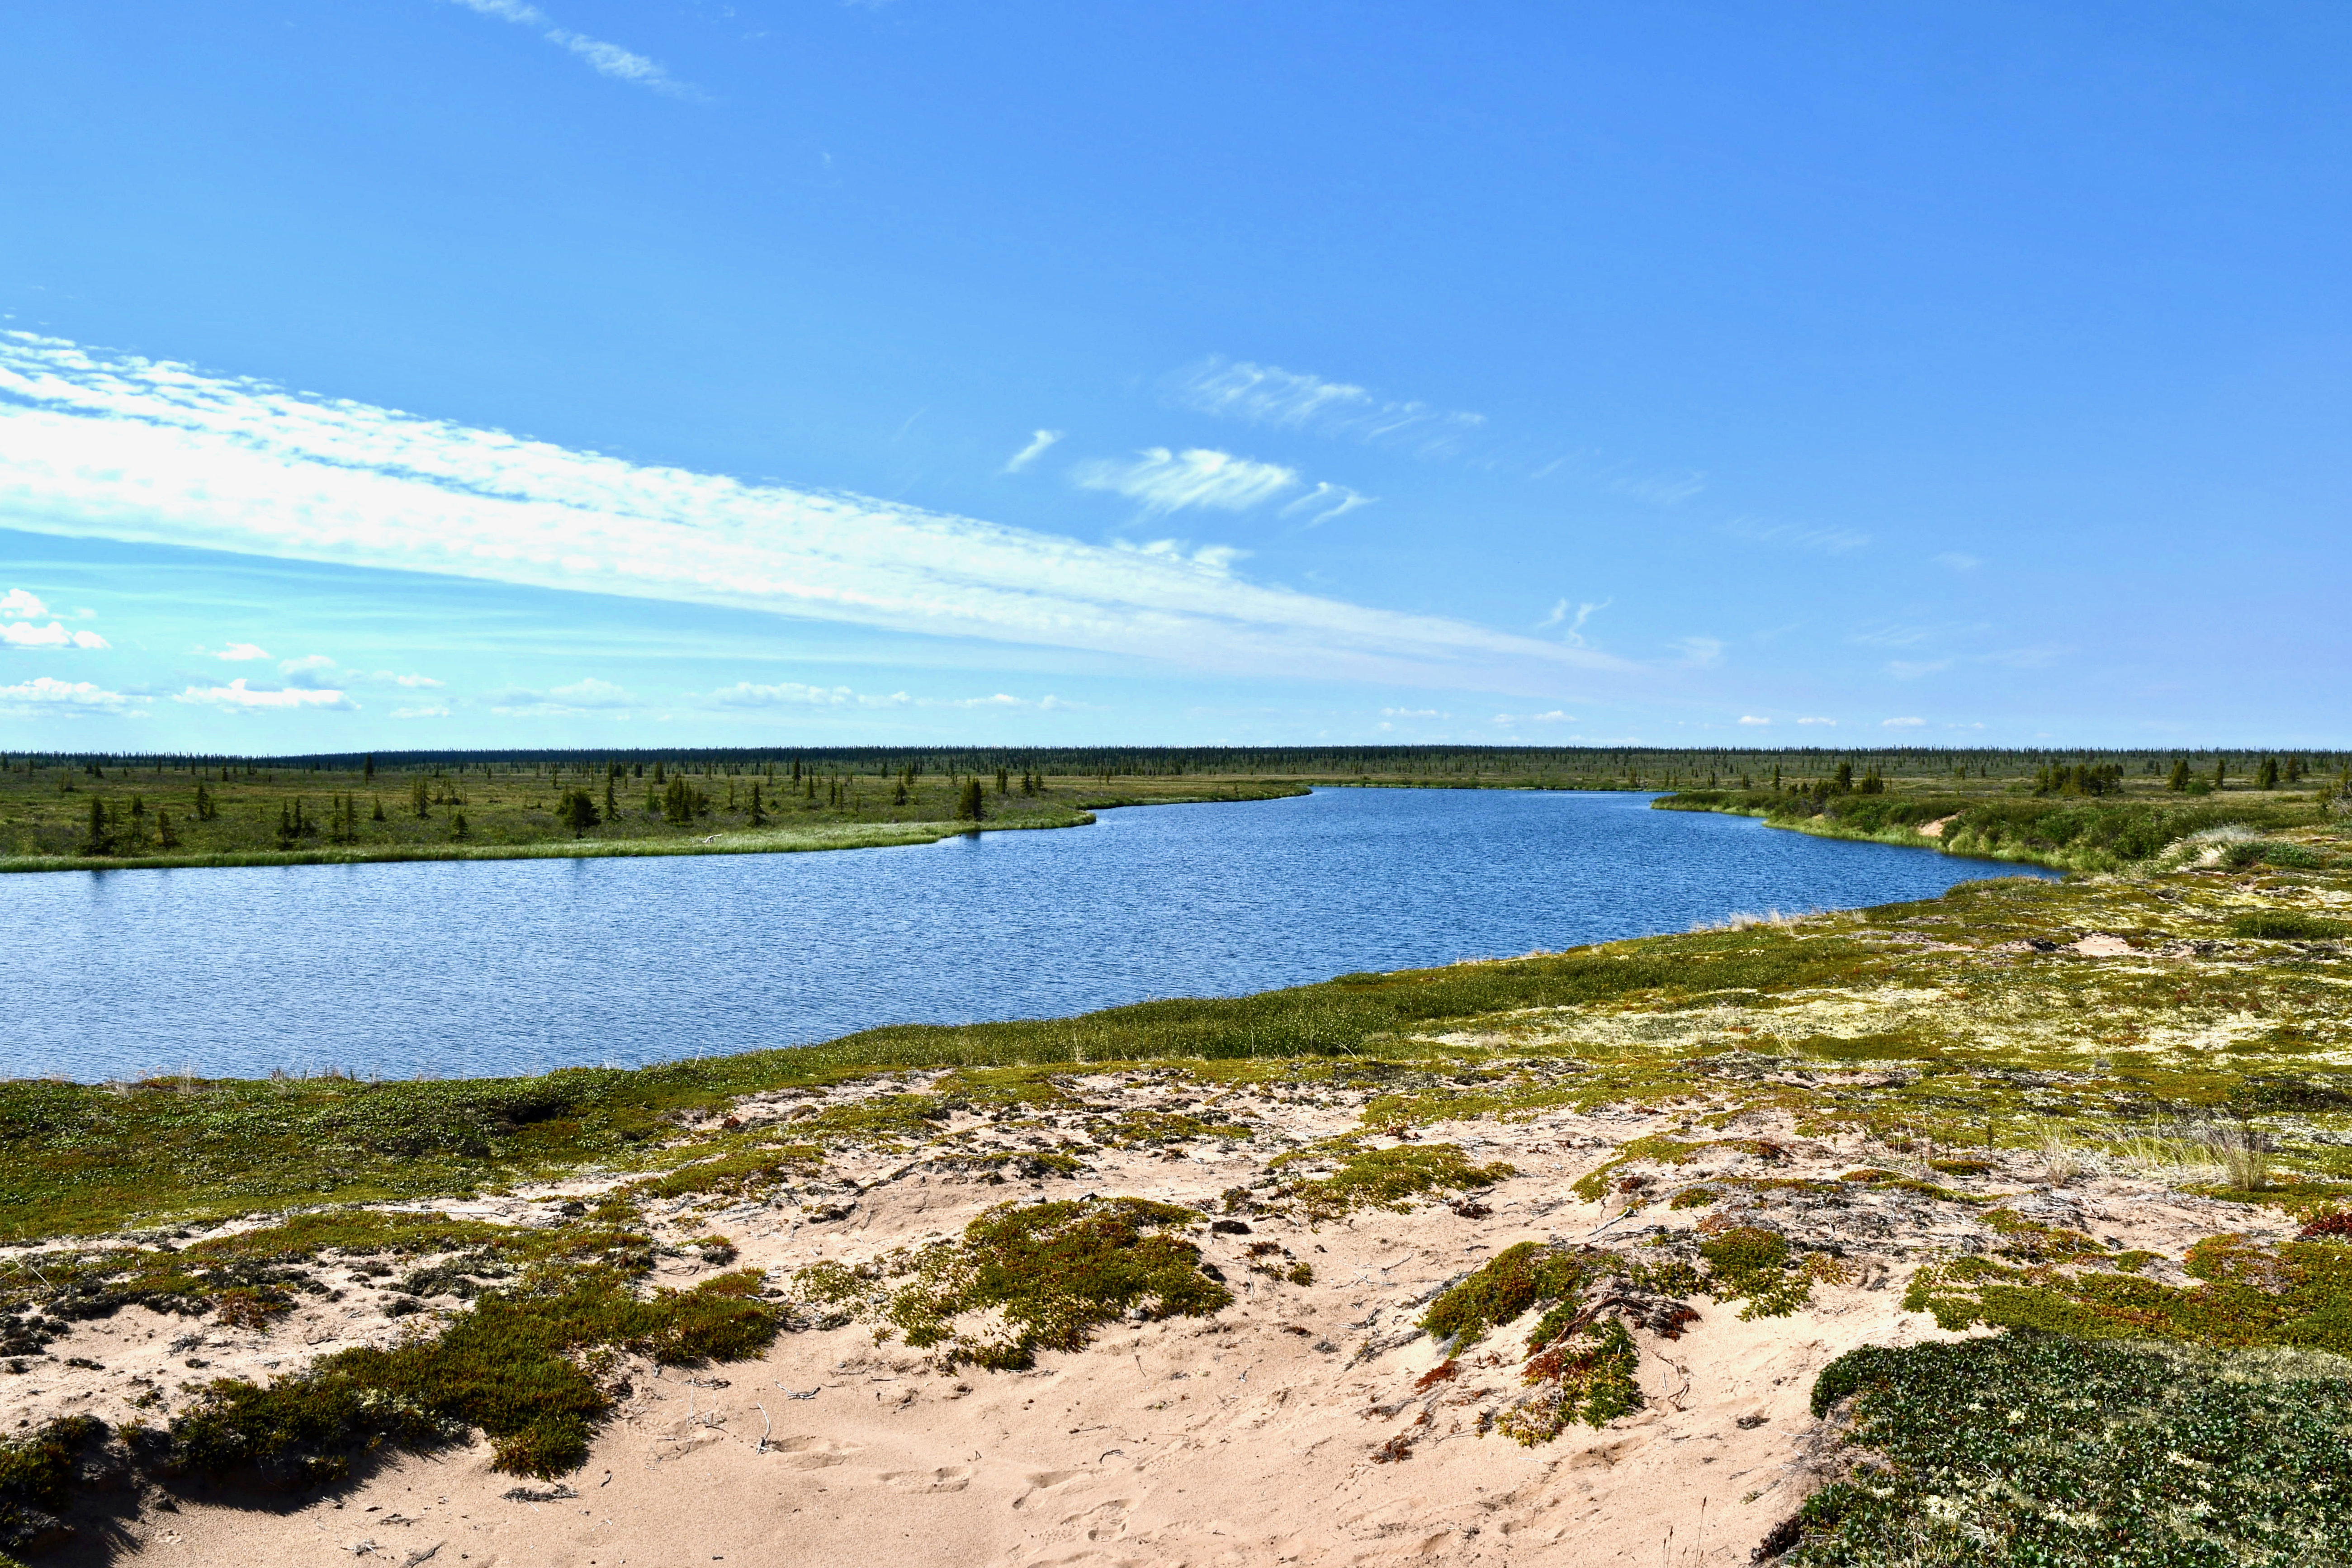 The Naiju River is one of main sandy retreats scattered along the shores of Great Bear Lake. 